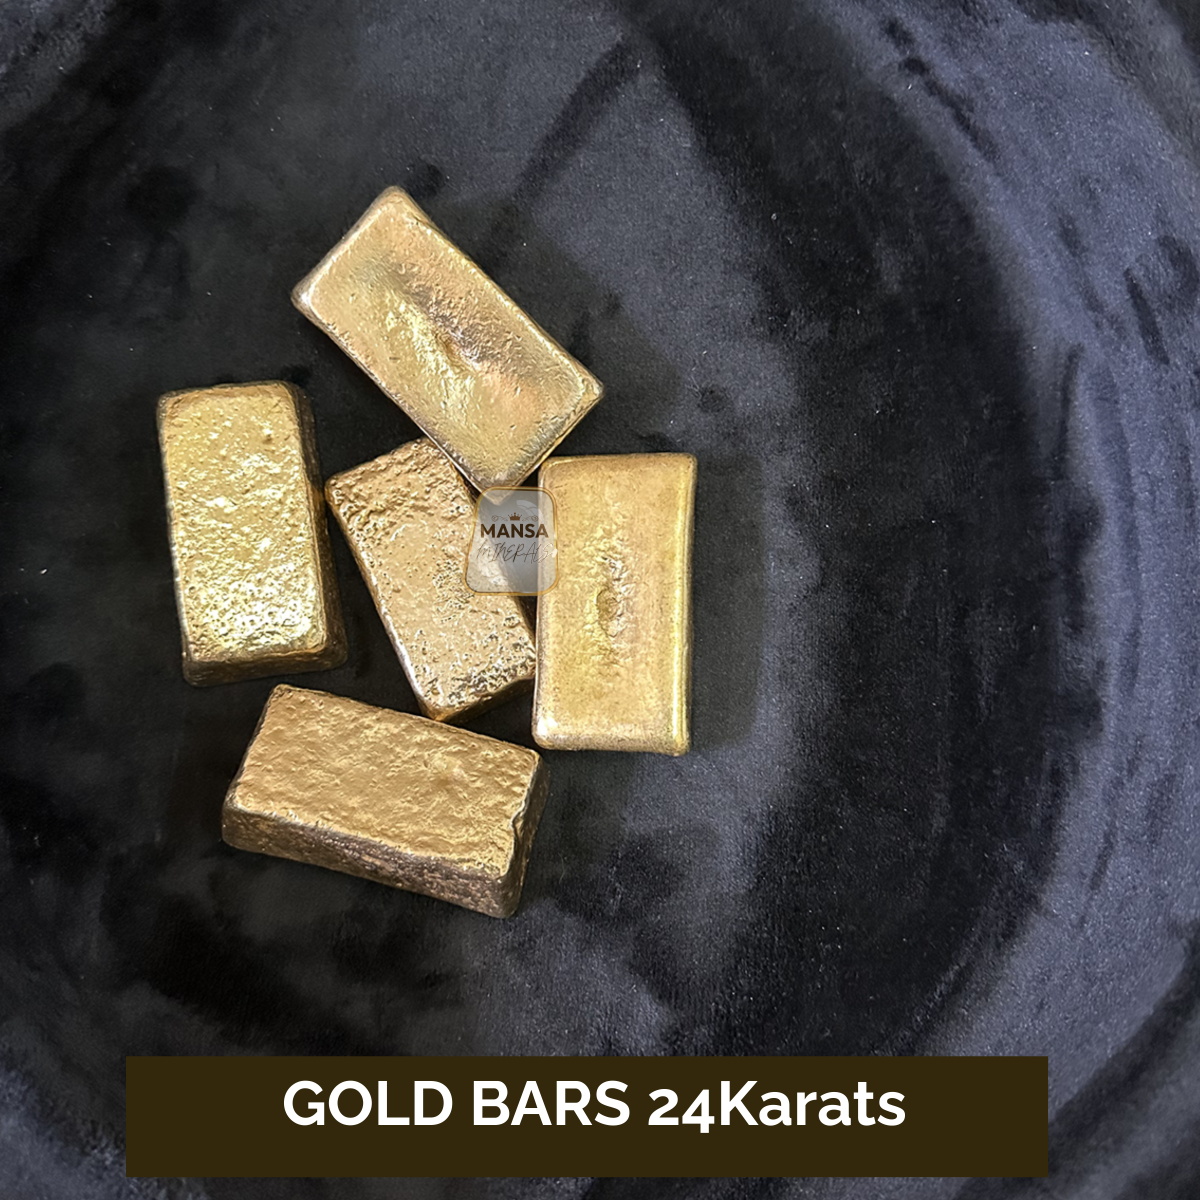 We sell Gold Bars in New York USA